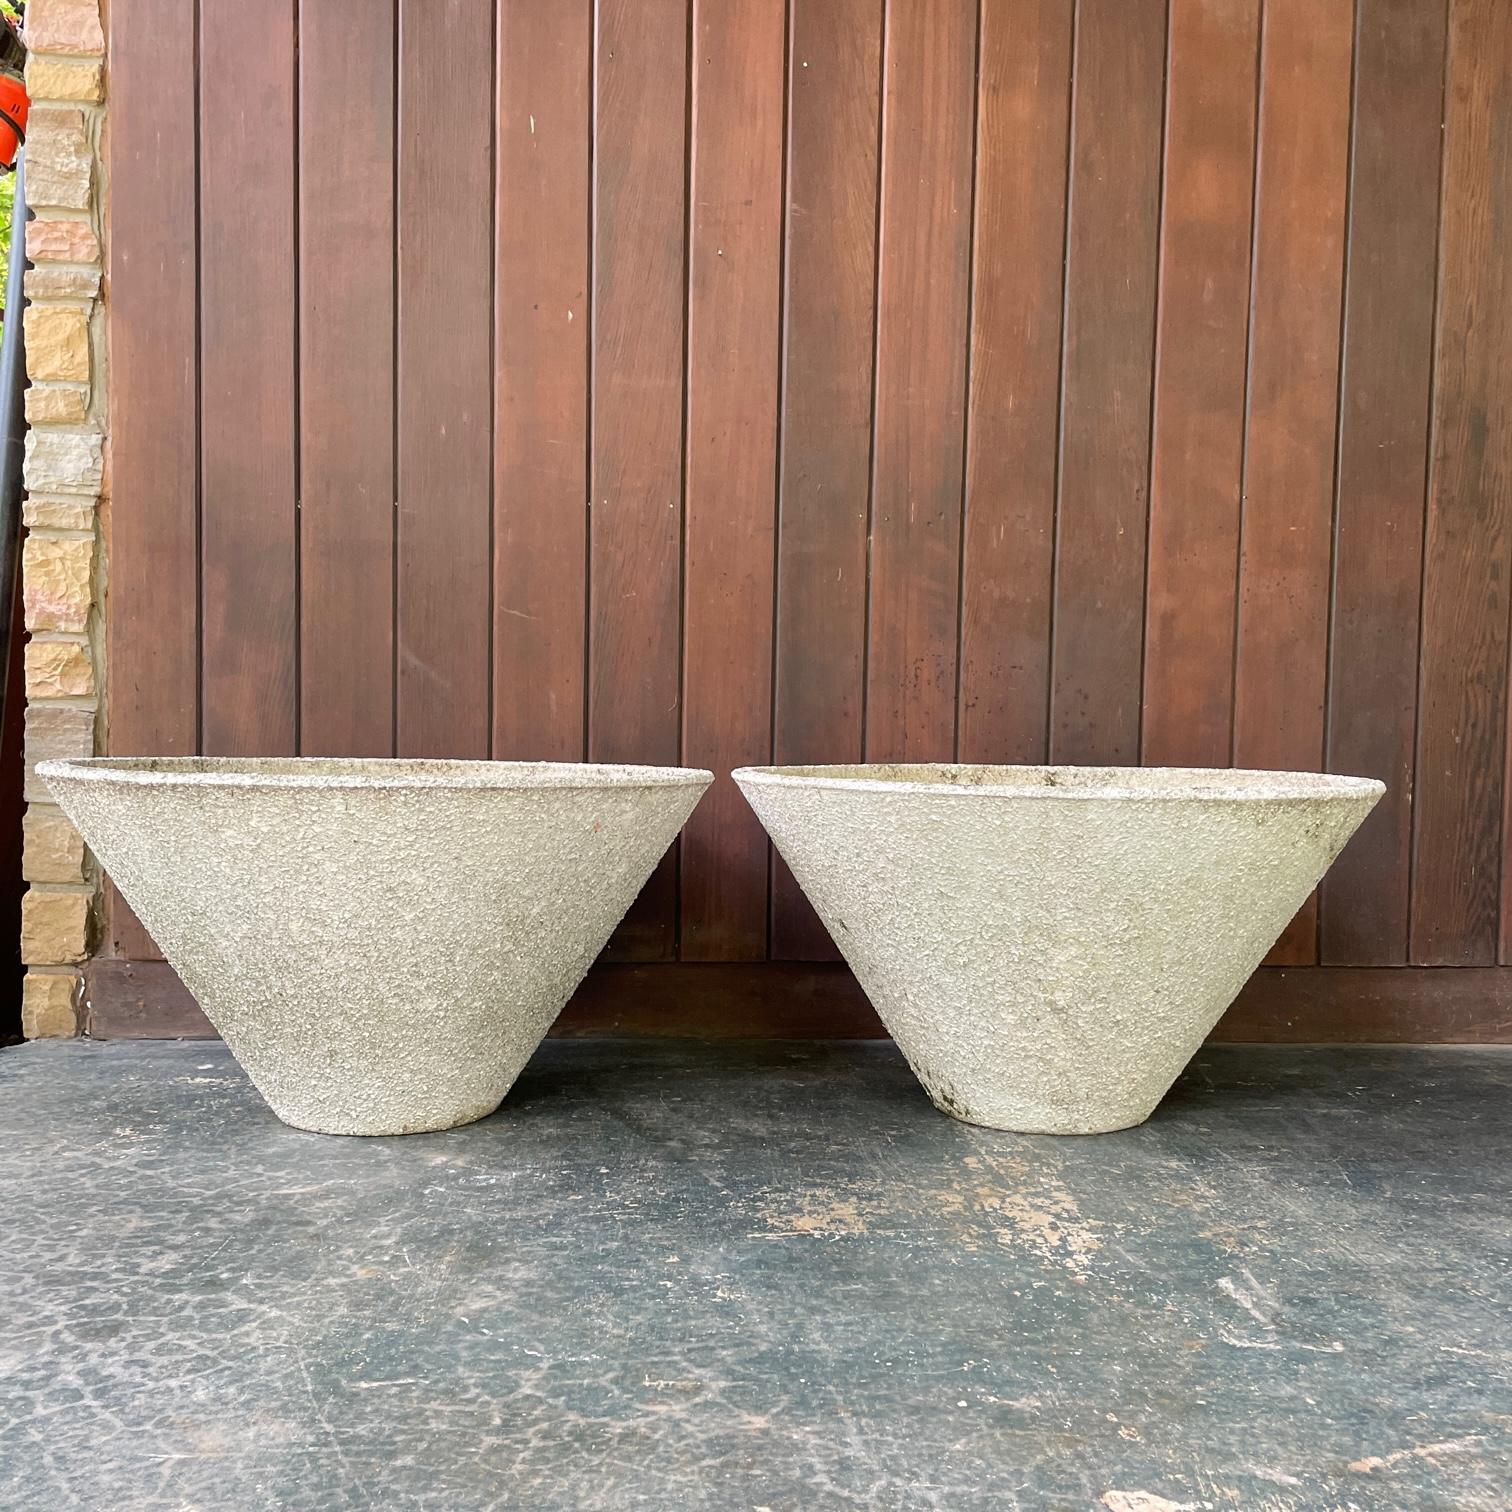 Mid-Century Modern 1960s Massive Coned Planters Pair by Willy Guhl for Eternit, California Style For Sale